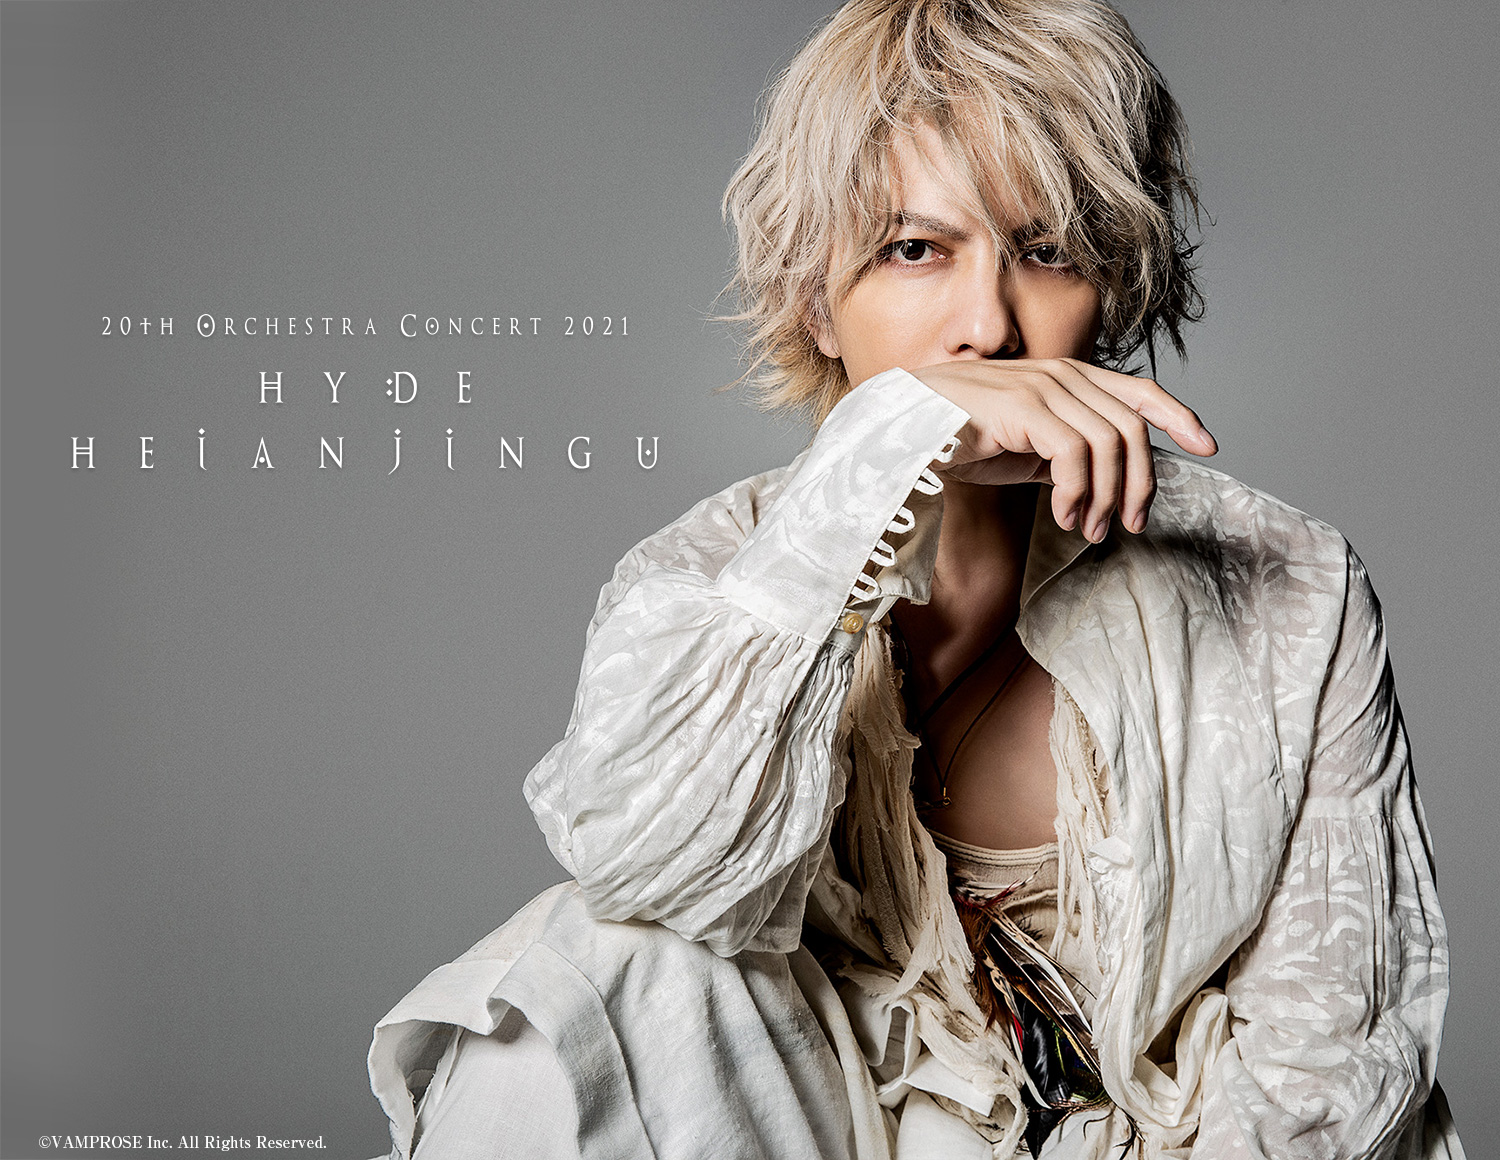 HYDE delivers video message to fans before historic 20th Anniversary  orchestral concert – J-Generation